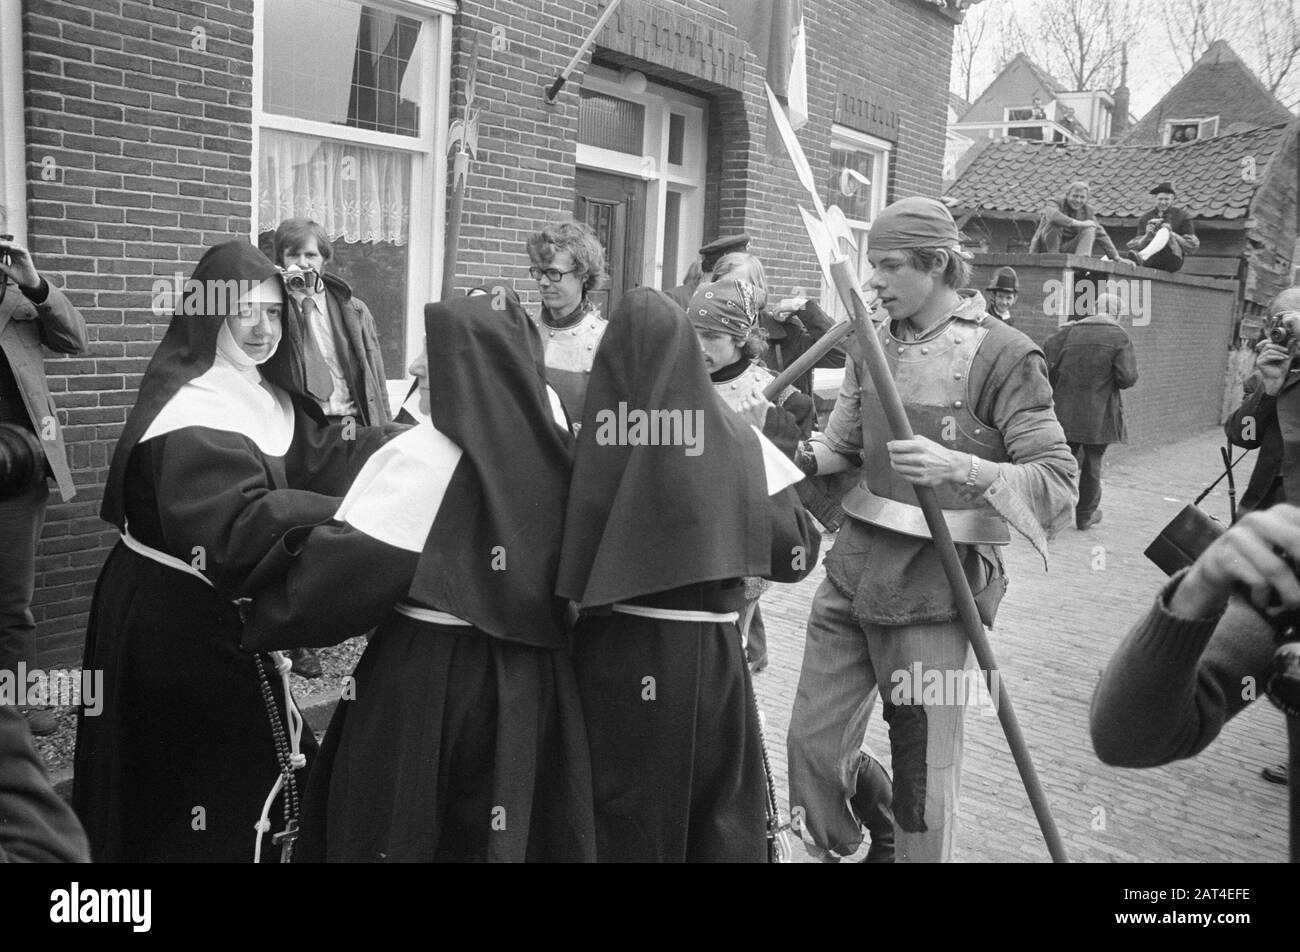 Residents of Den Briel celebrate in old costumes liberation by Watergeuzen  in 1572 Date: 1 april 1972 Location: Brielle, South-Holland Keywords:  costumes Stock Photo - Alamy